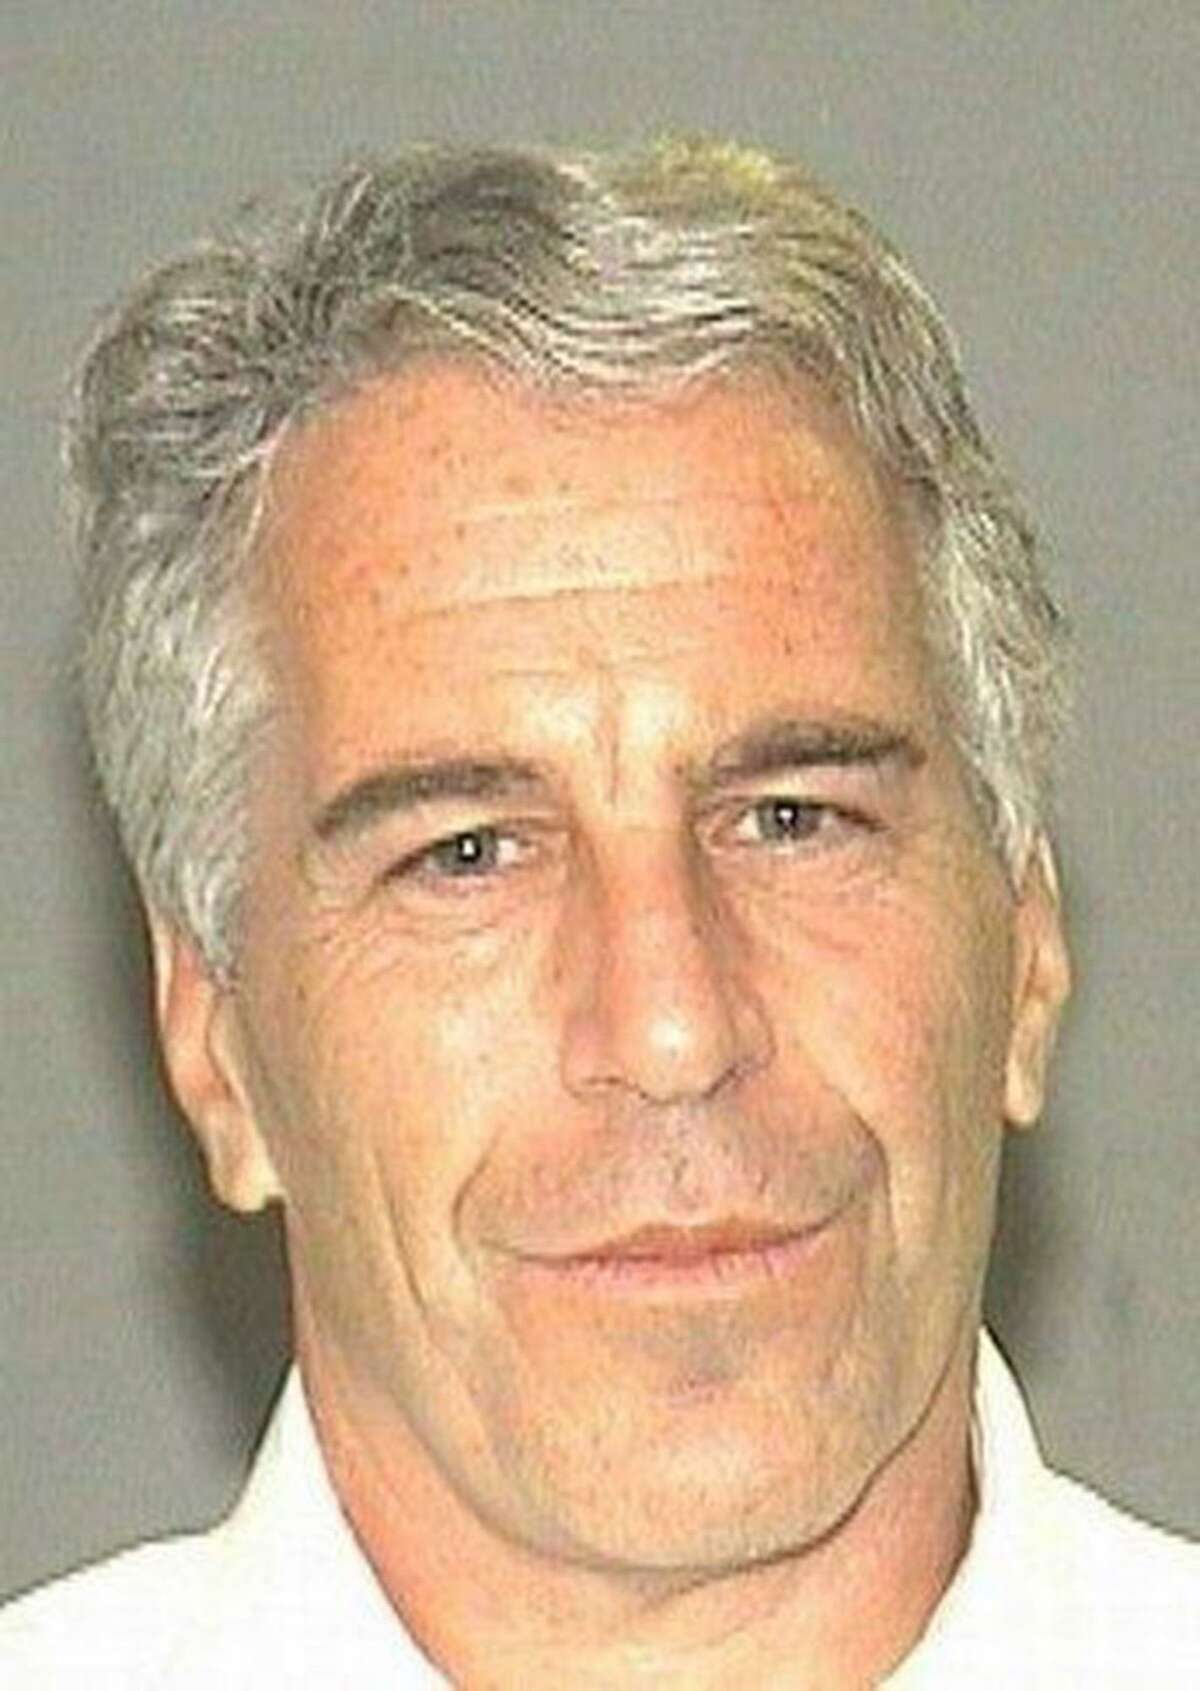 Jeffrey Epstein had a plot to take over the world by impregnating scores of women on a remote desert estate.